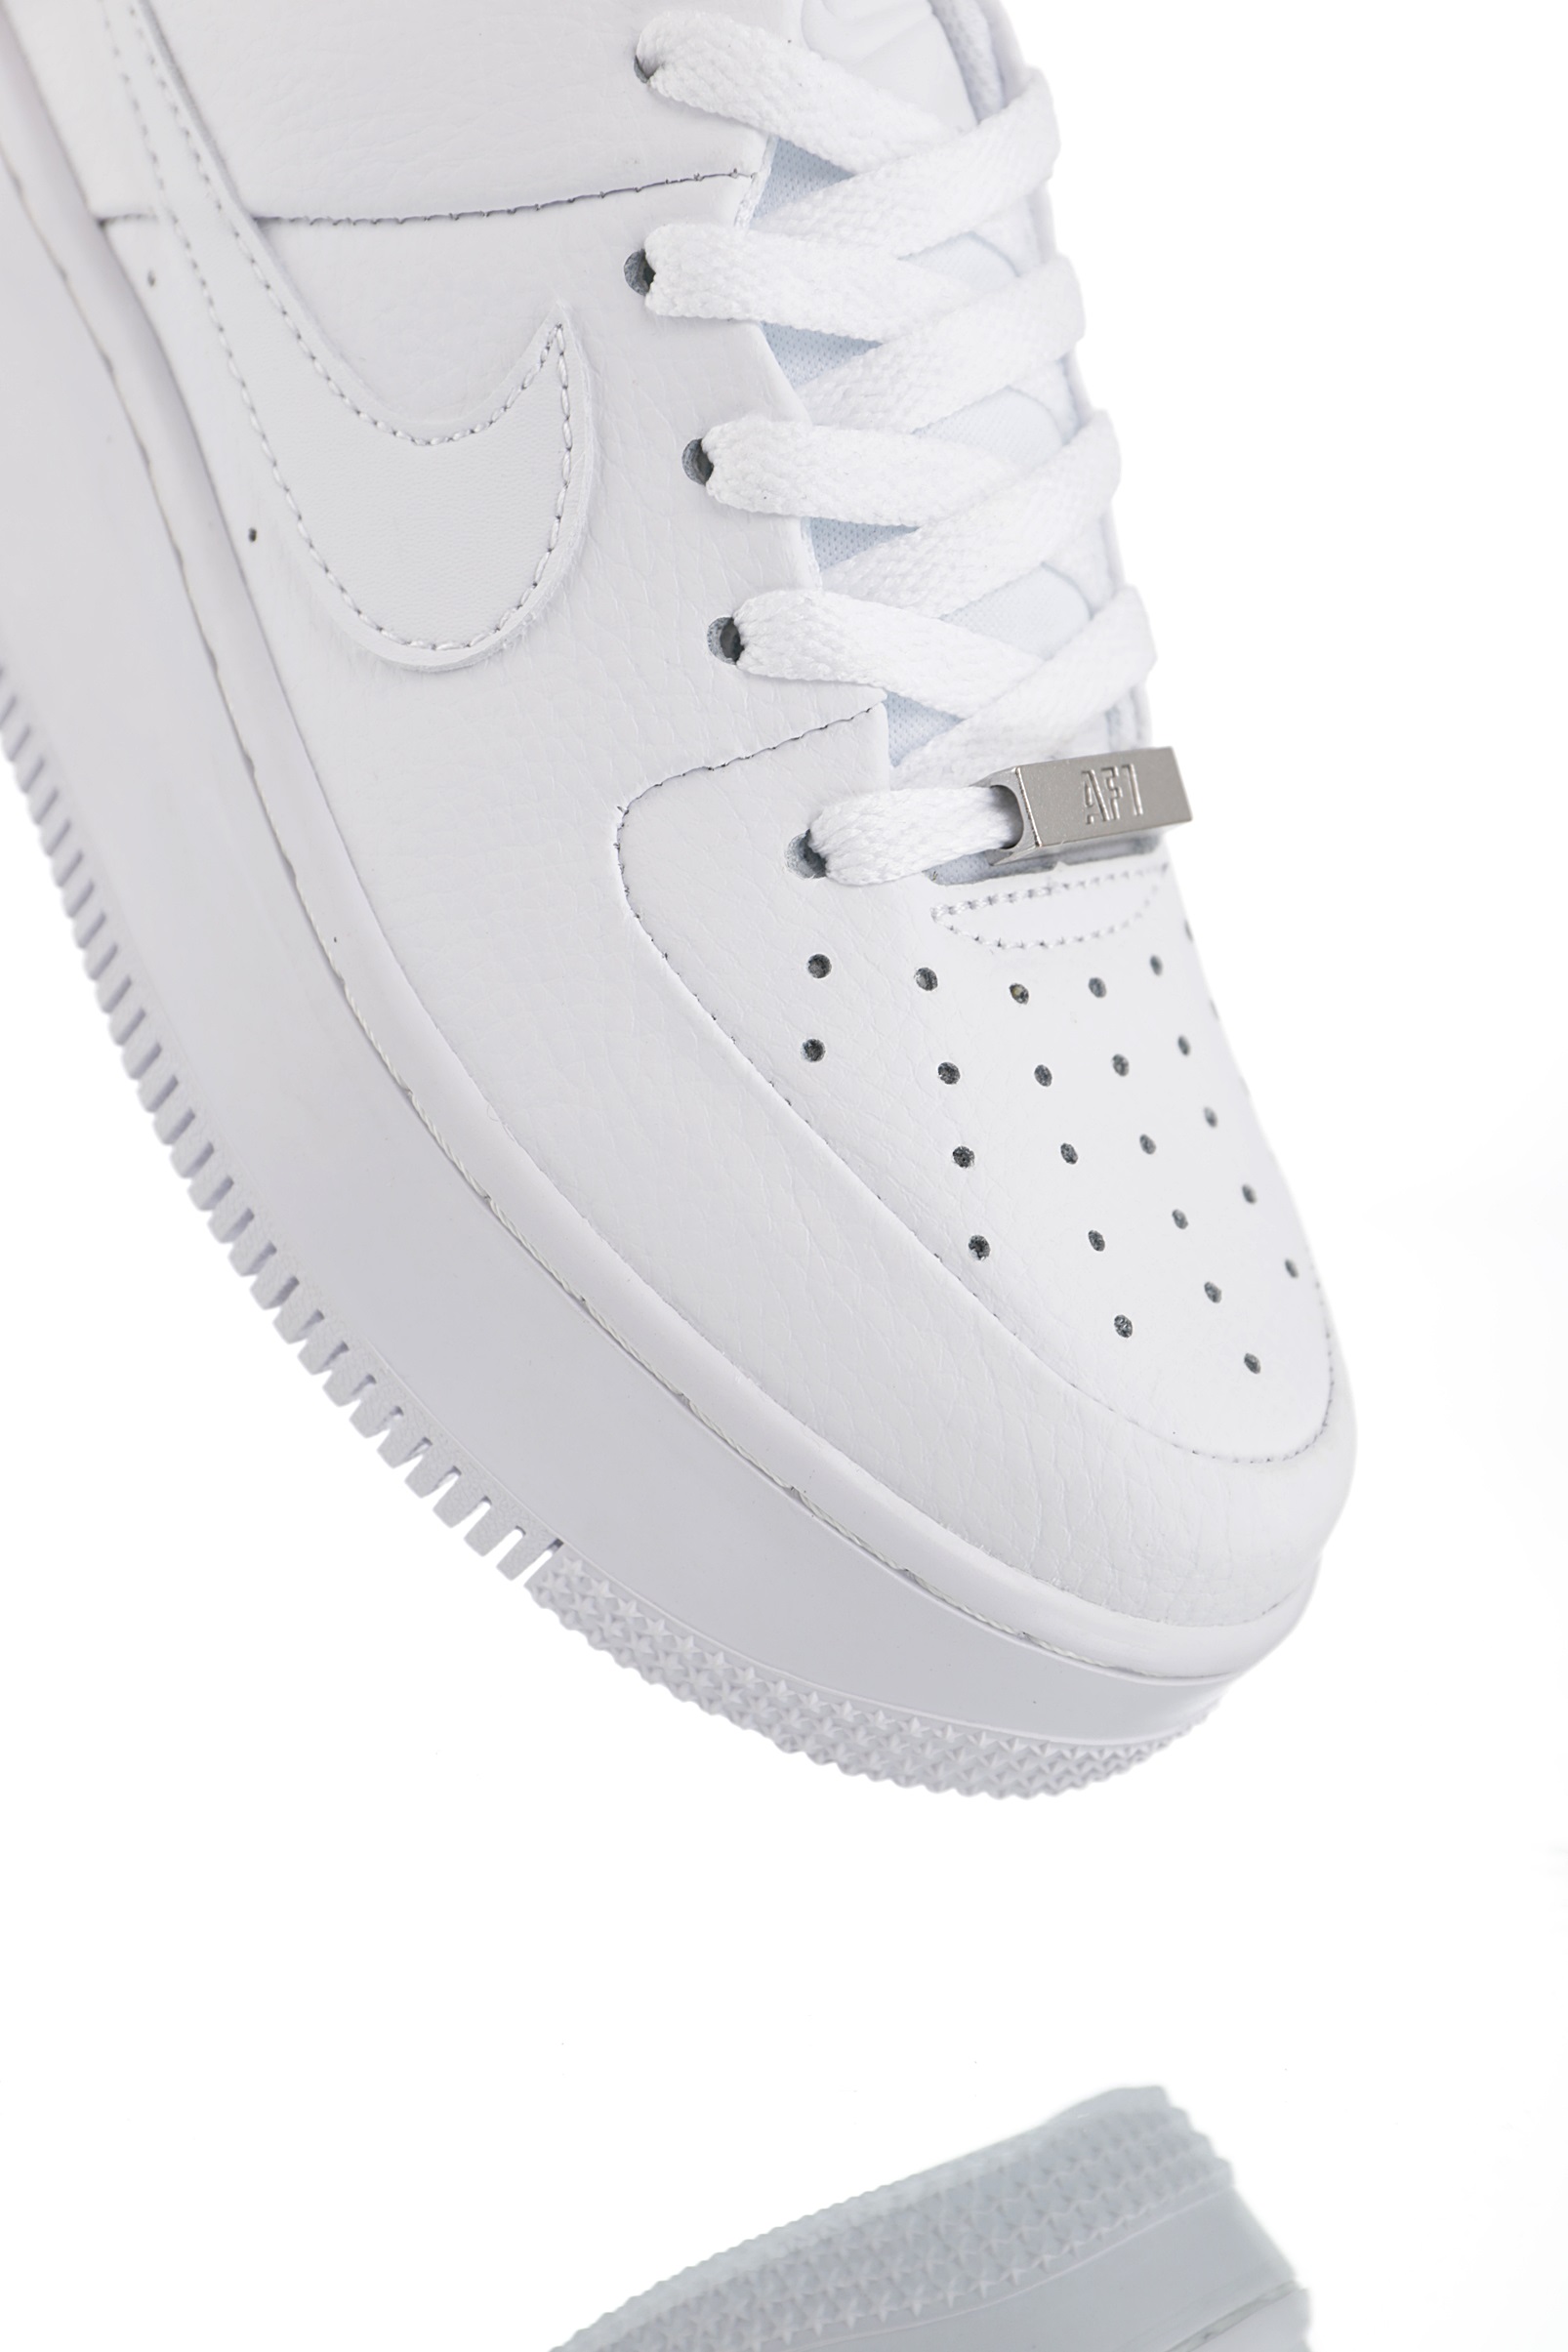 cheapest perfect quality Fake Air Force 1 Sage Low Triple White (W How Do Fake Air Forces Look Like